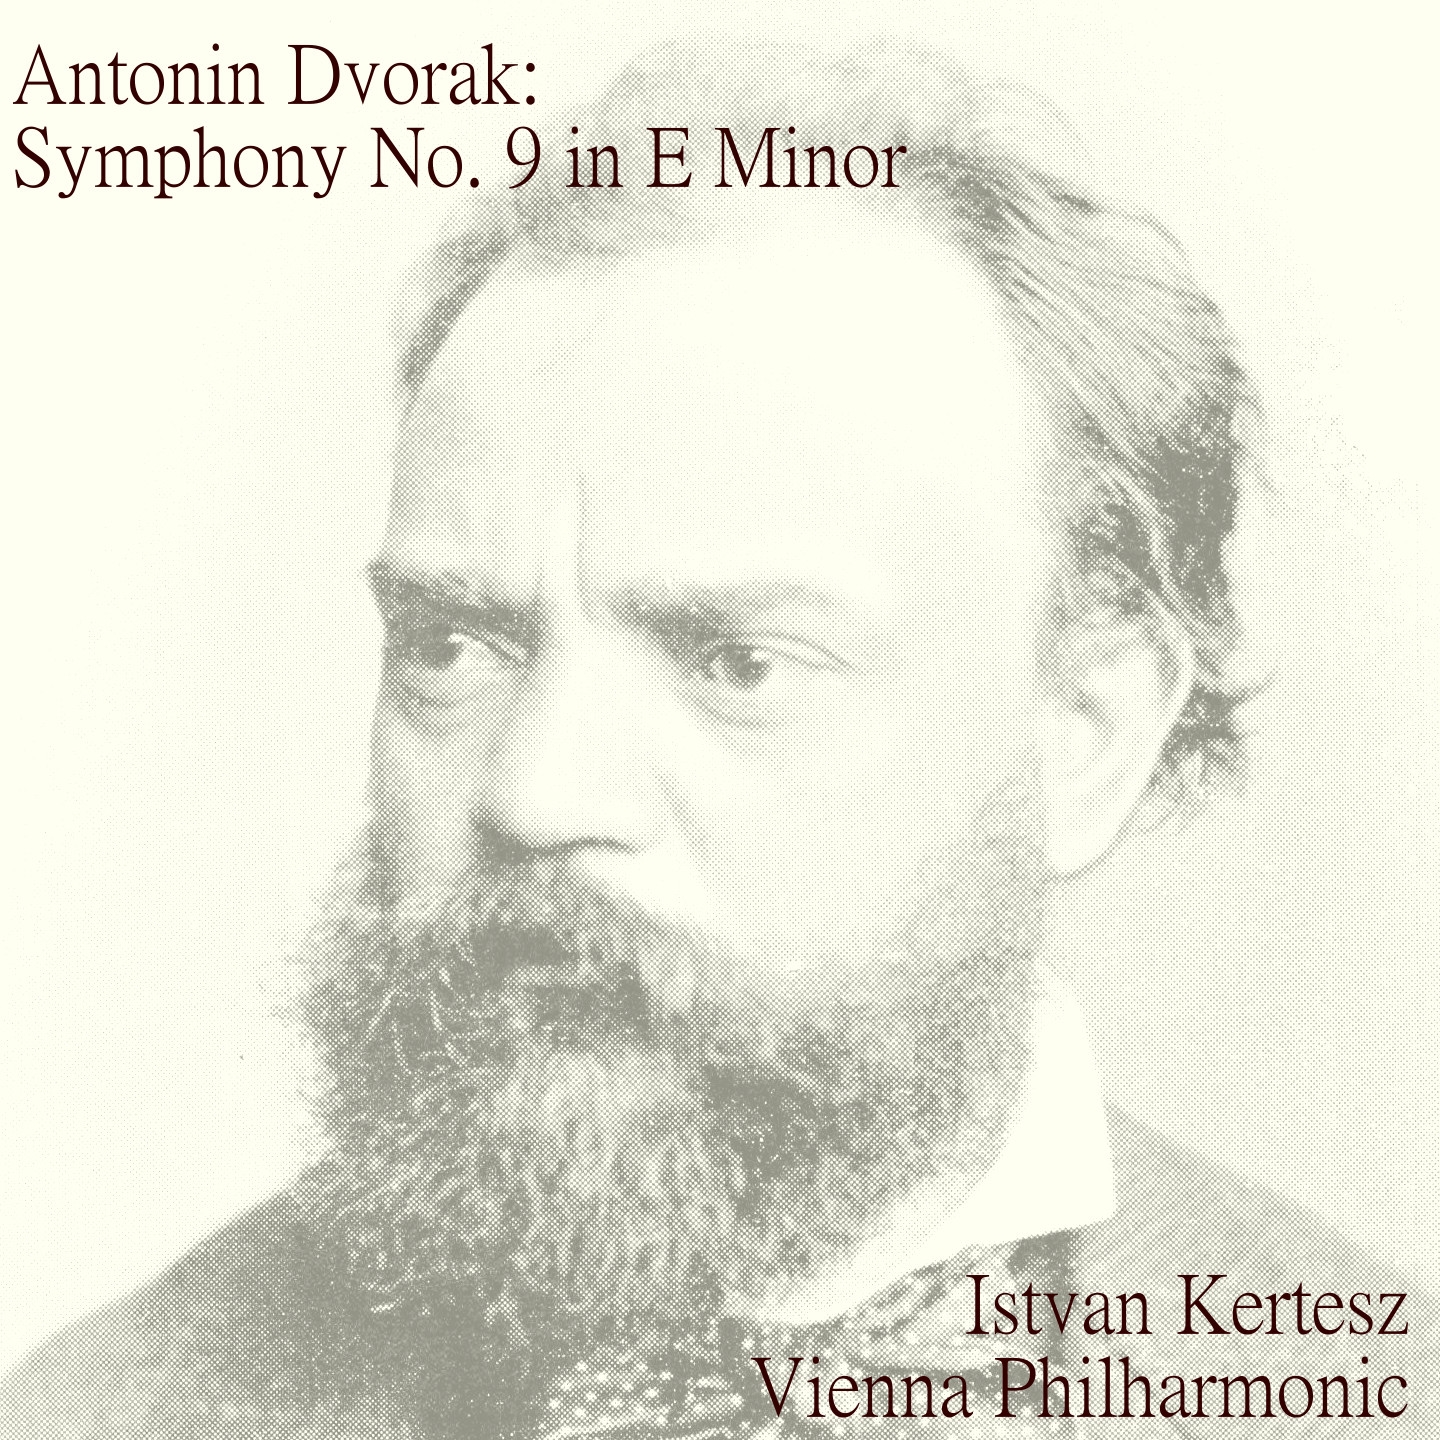 Dvora k: Symphony No. 9 in E minor, op. 95 " From the New World"